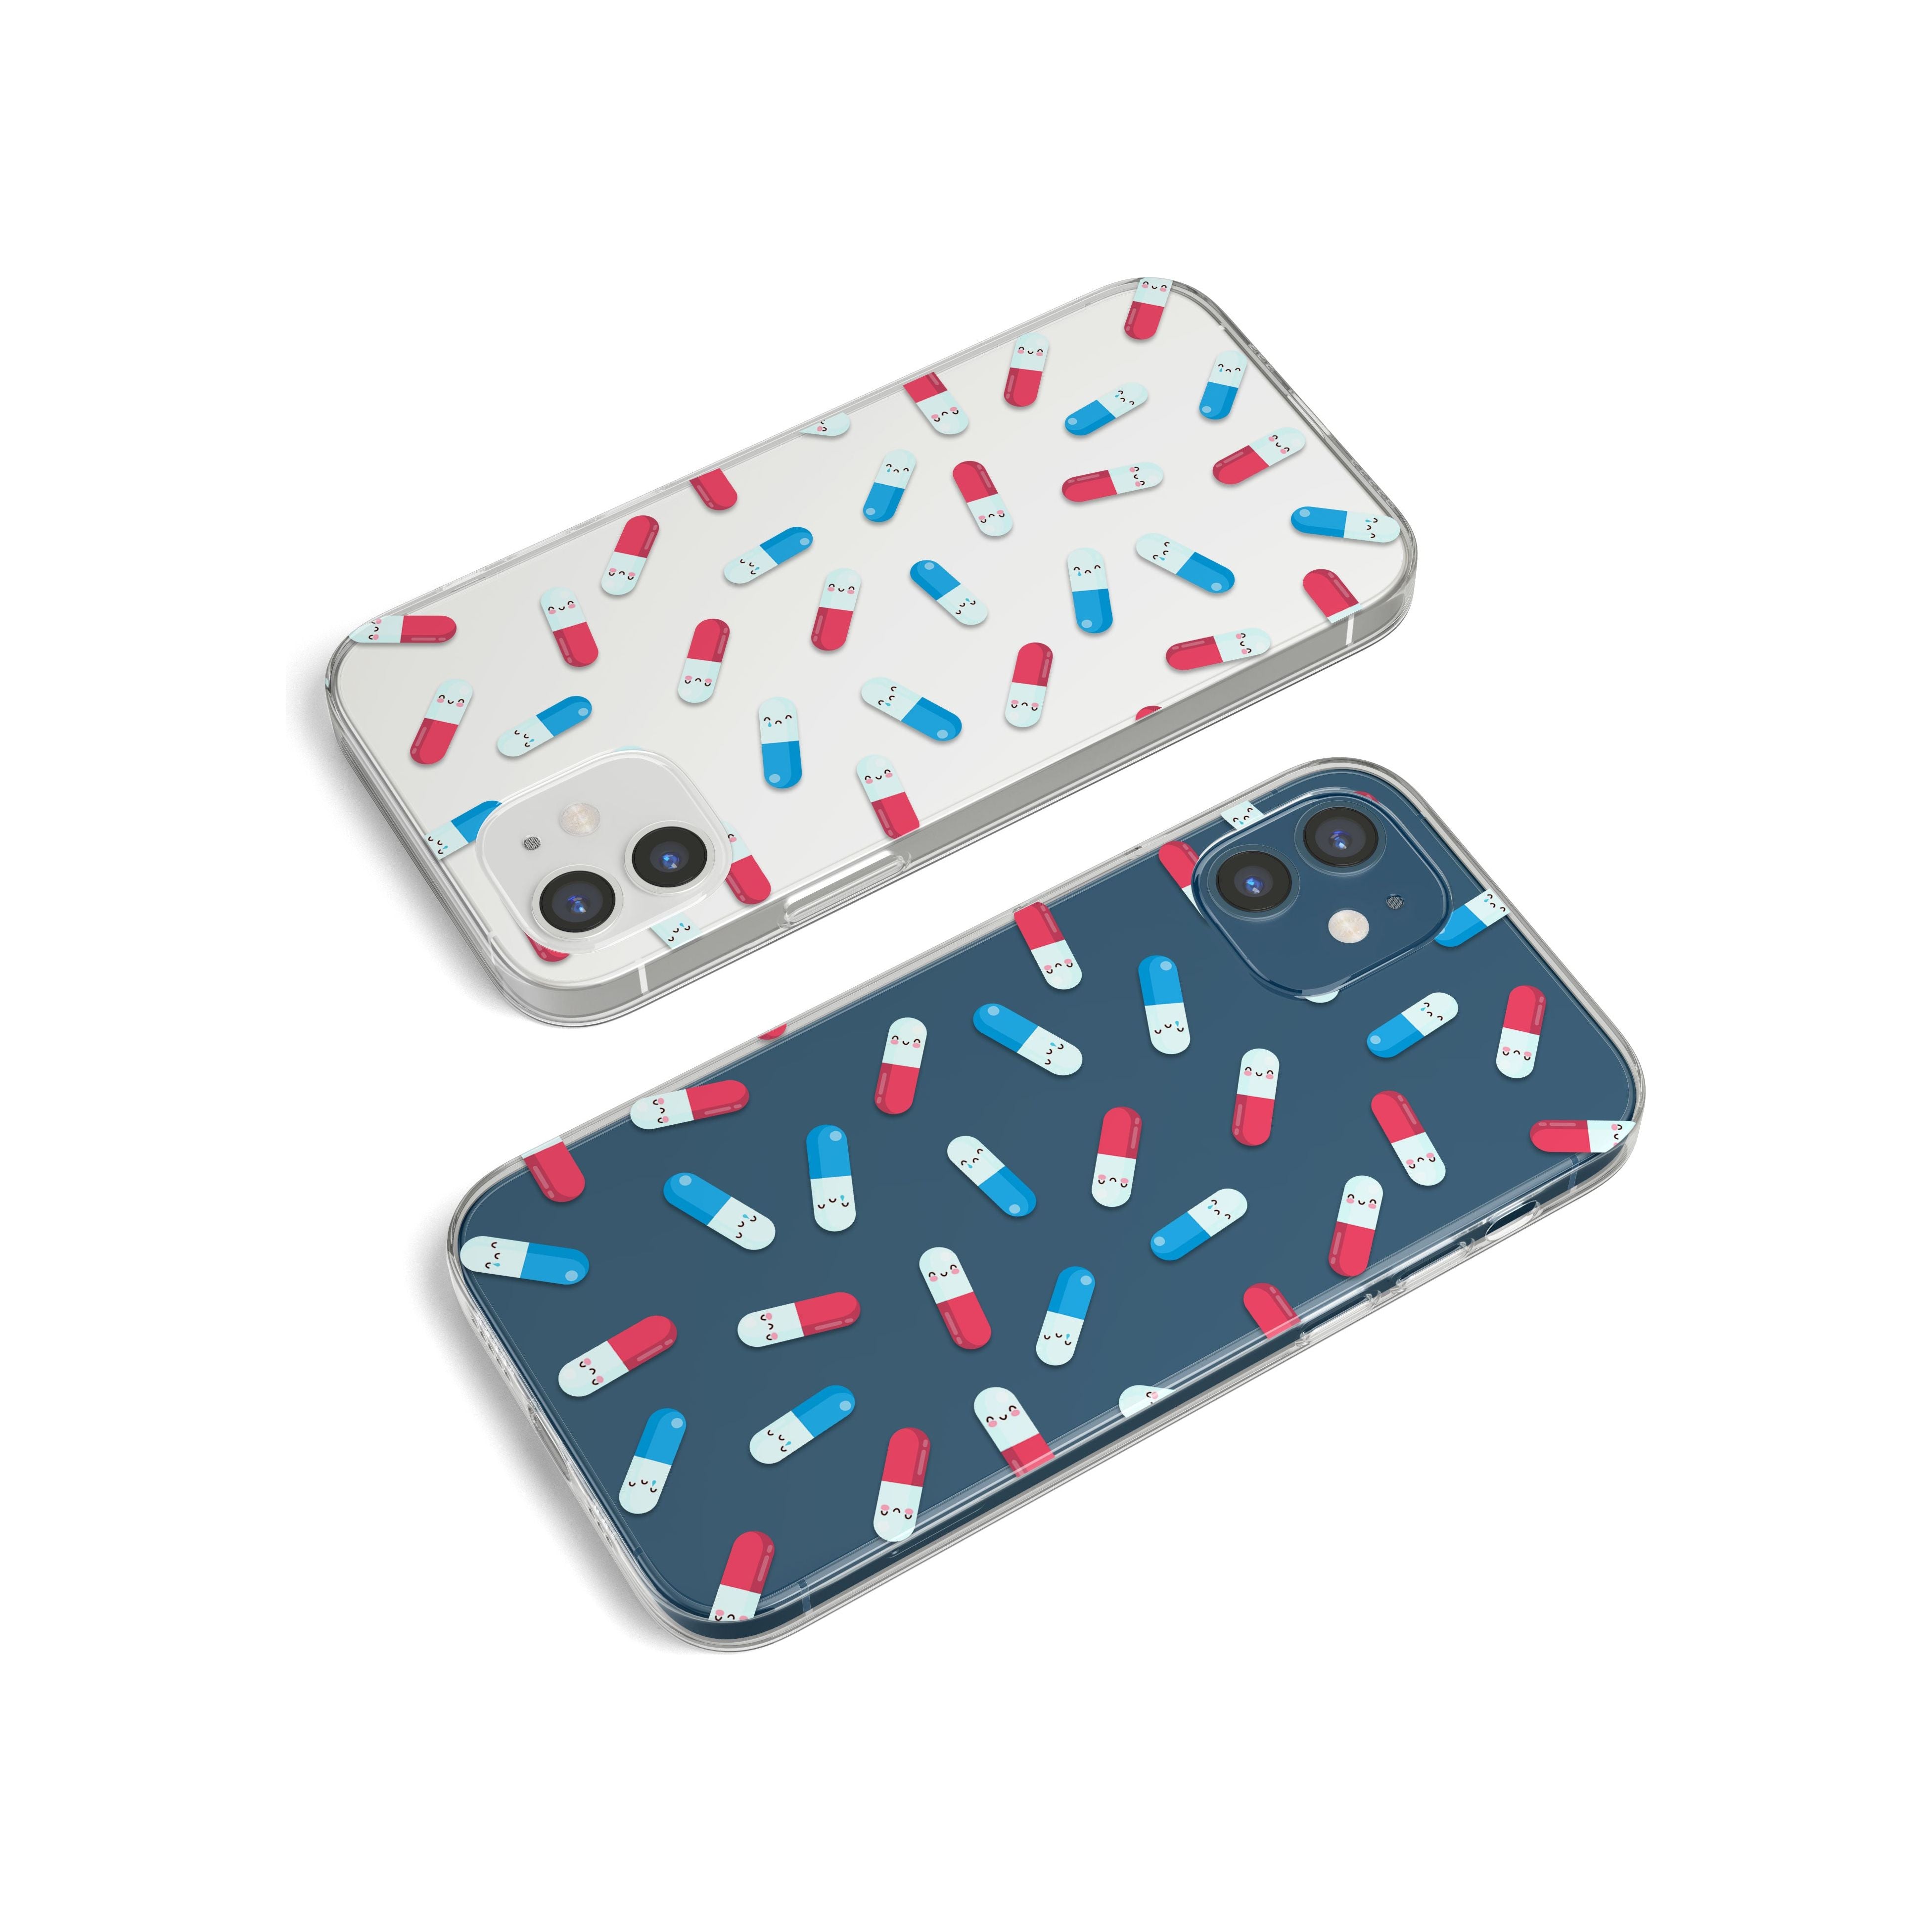 Kawaii Pill Pattern Impact Phone Case for iPhone 11, iphone 12